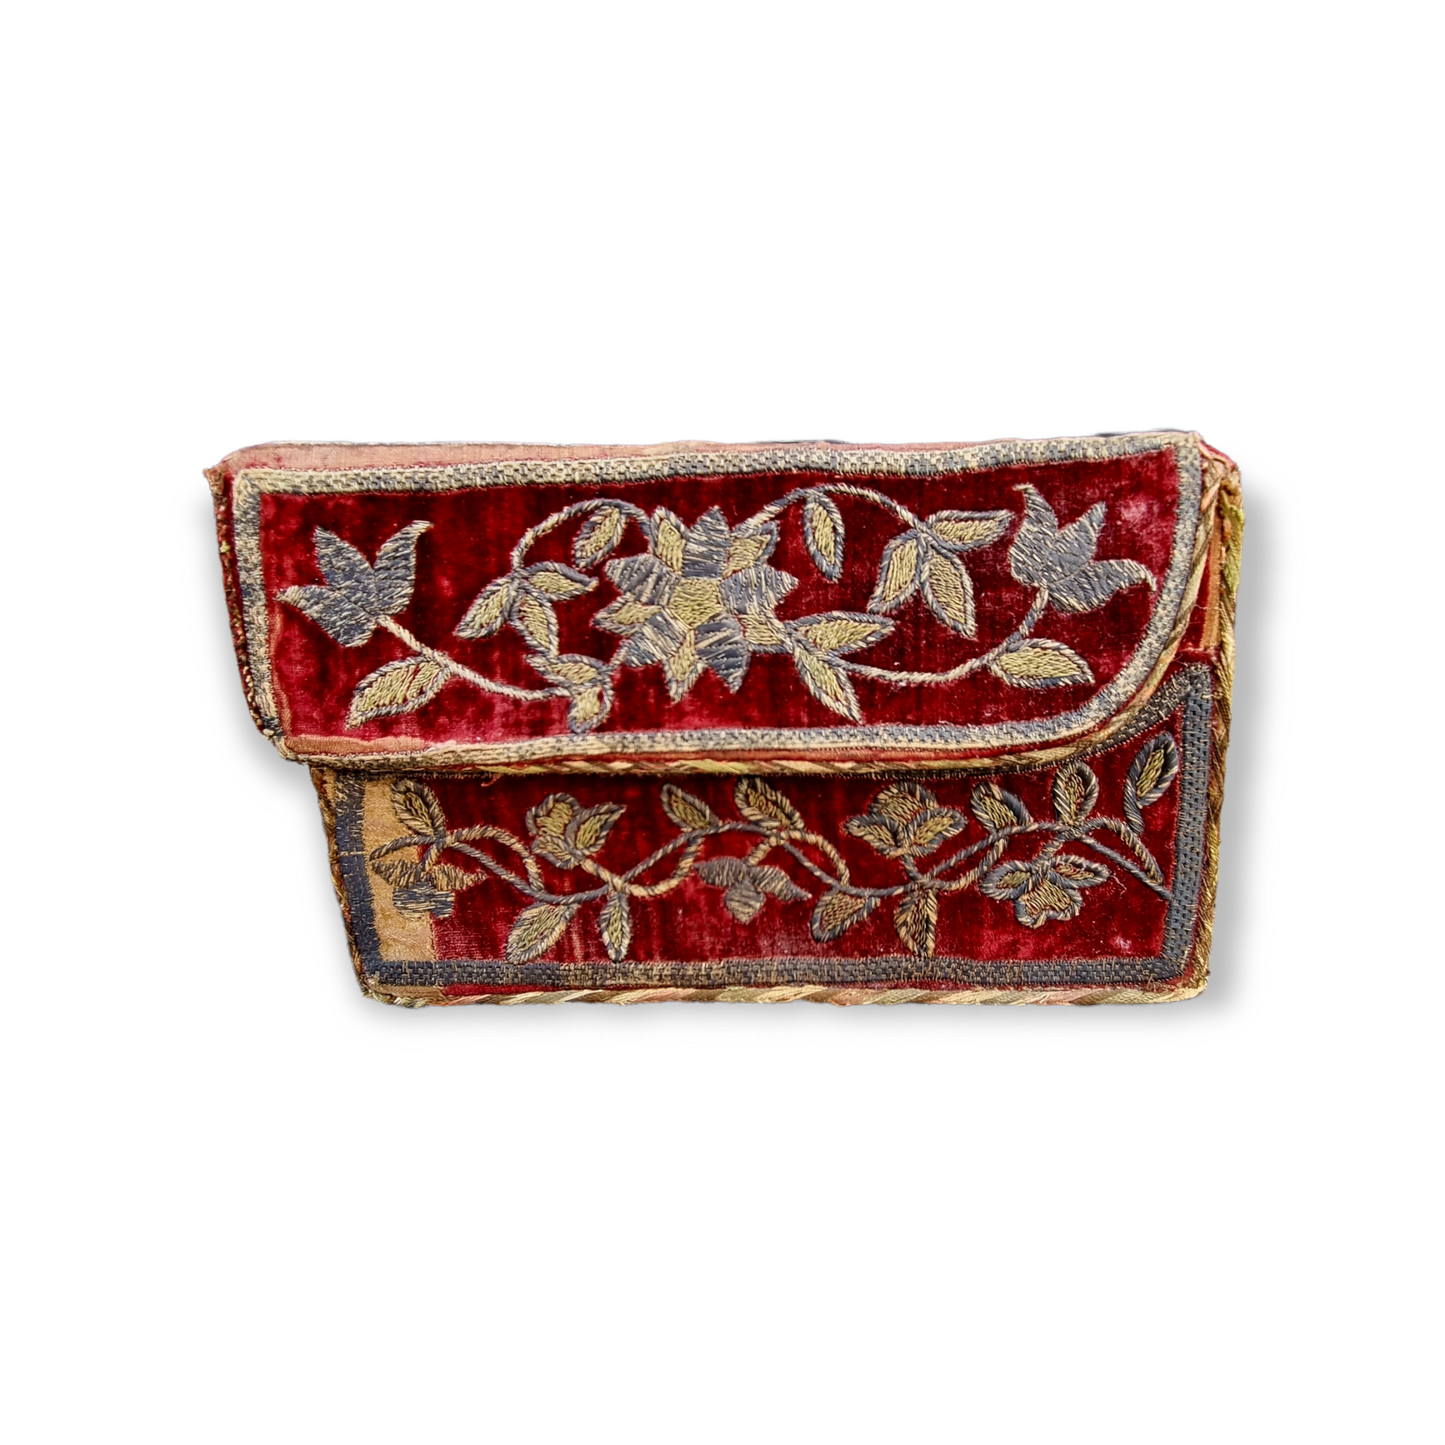 Early 17th Century Spanish Antique Embroidered Velvet Box